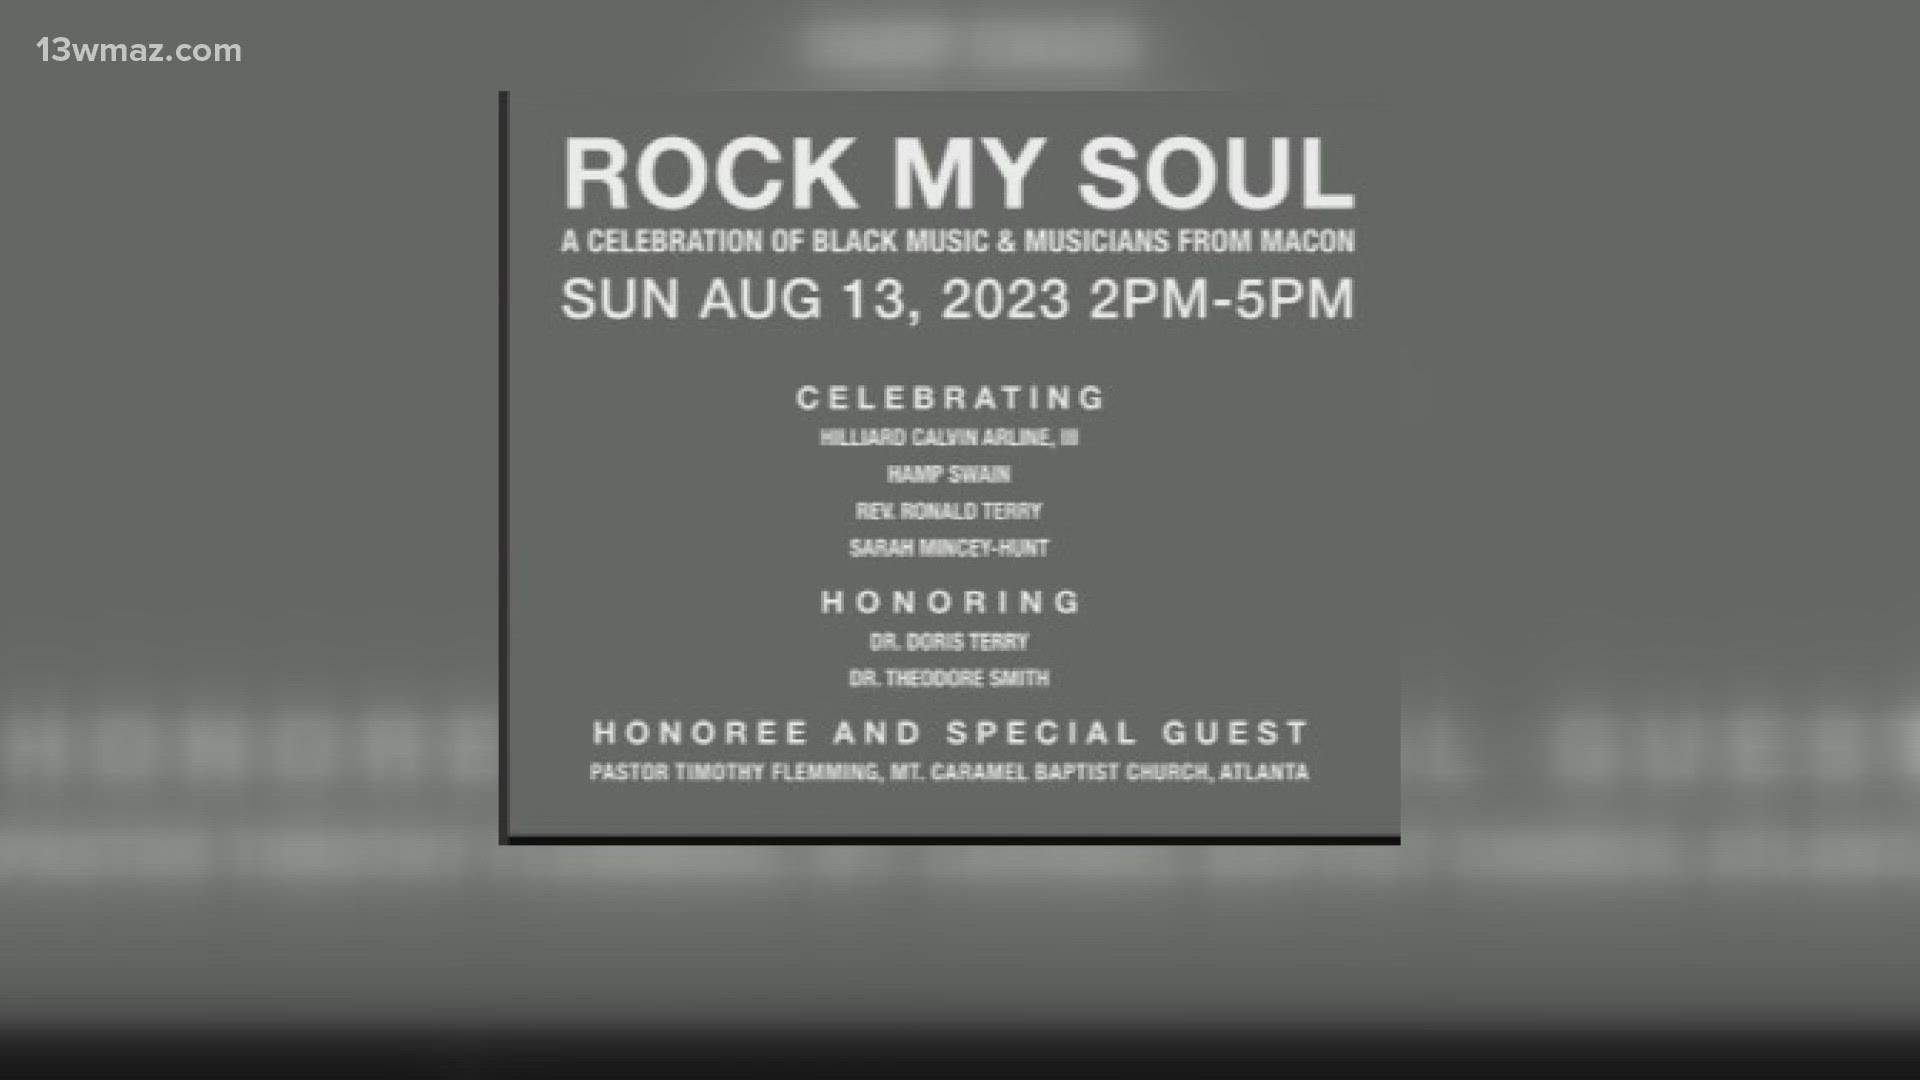 The "Rock my Soul" event honors the Black musicians who have called Macon home.